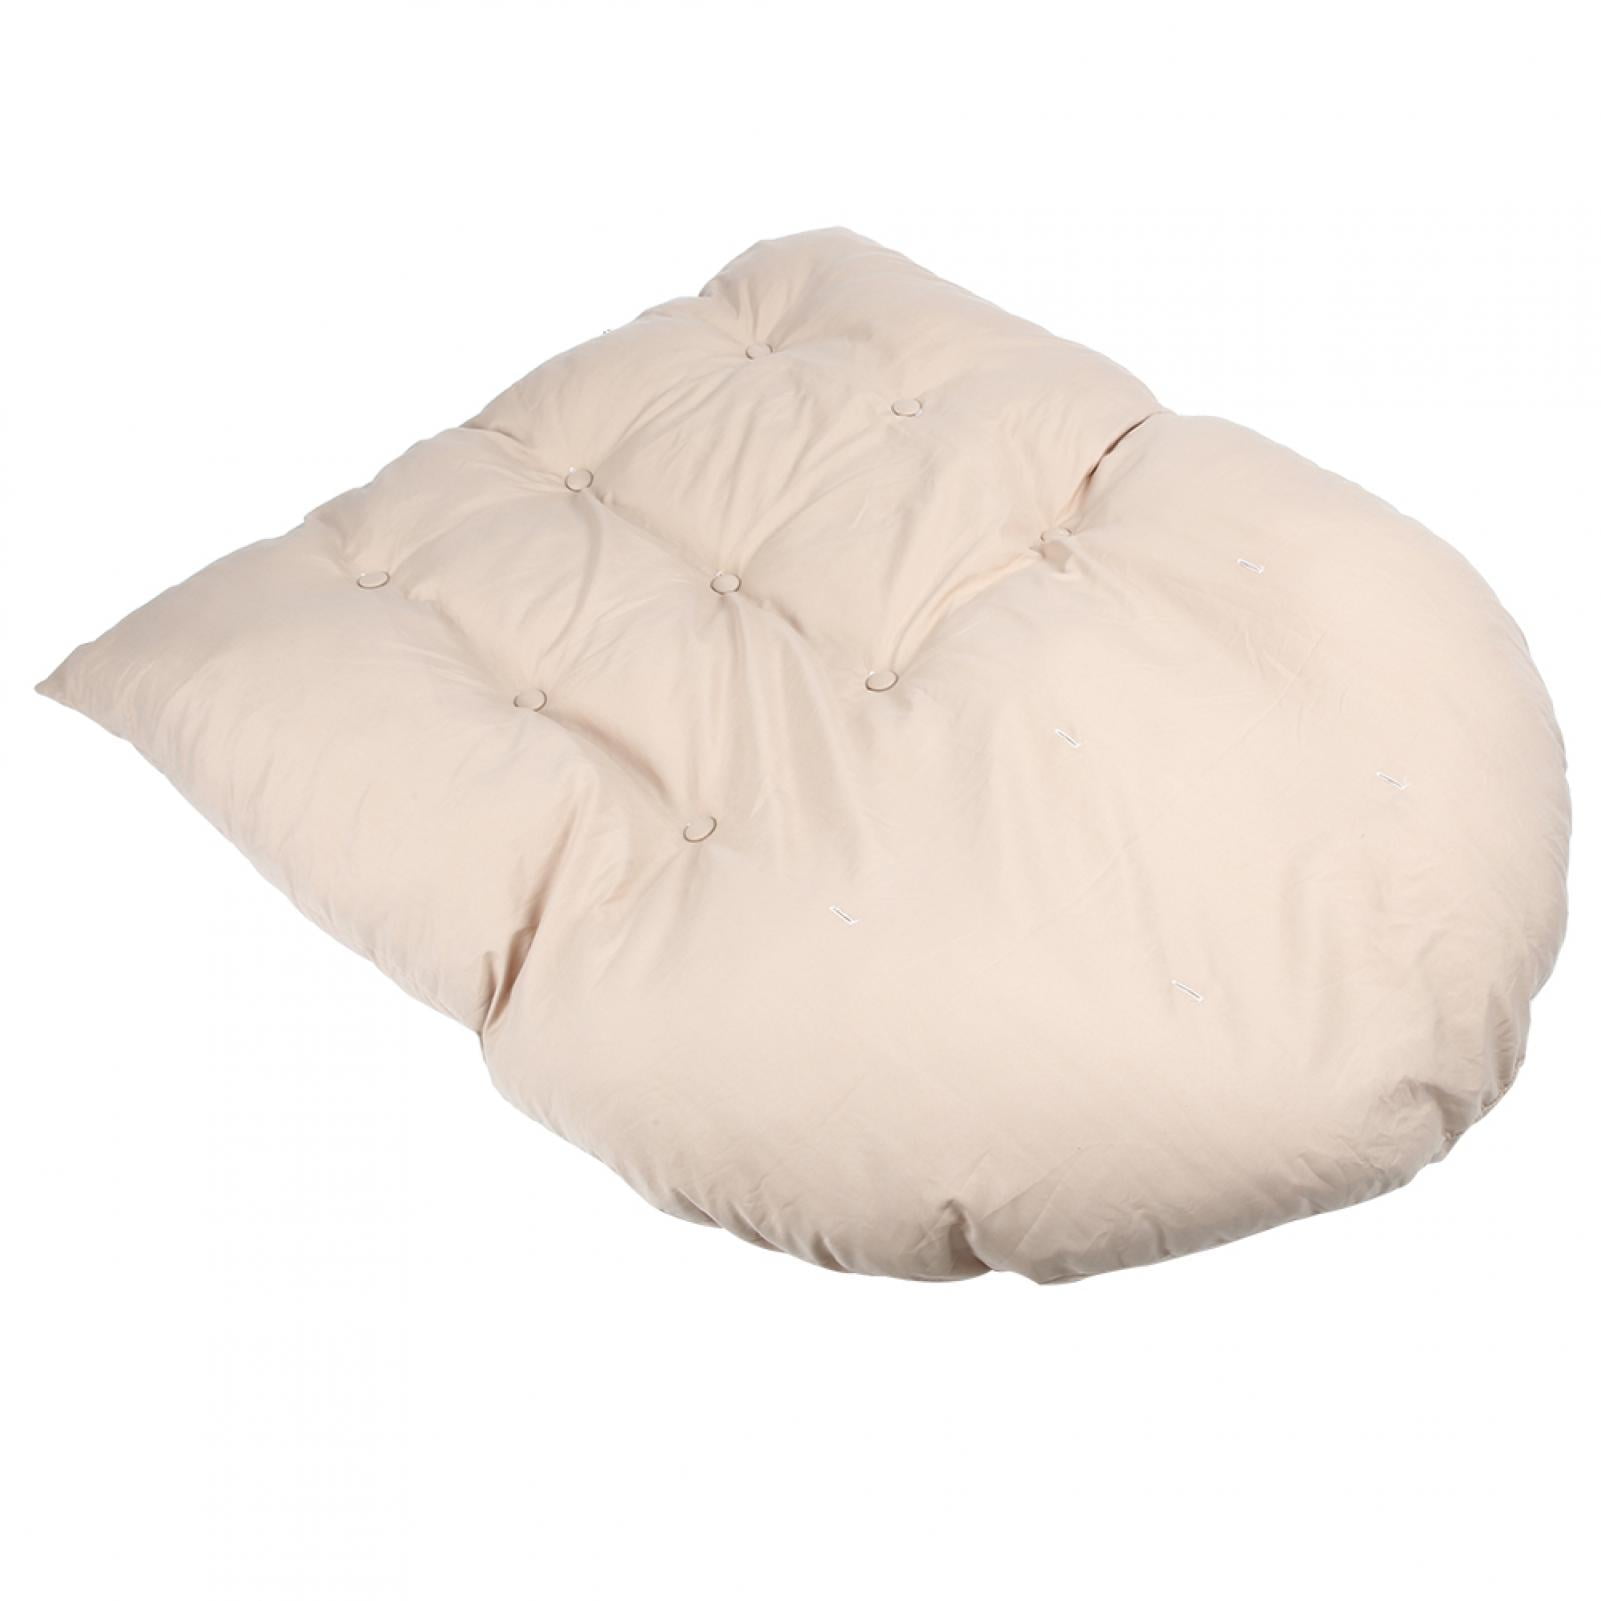 Floor Pillows Cushions Round Chair Cushion Outdoor Seat Pads for 